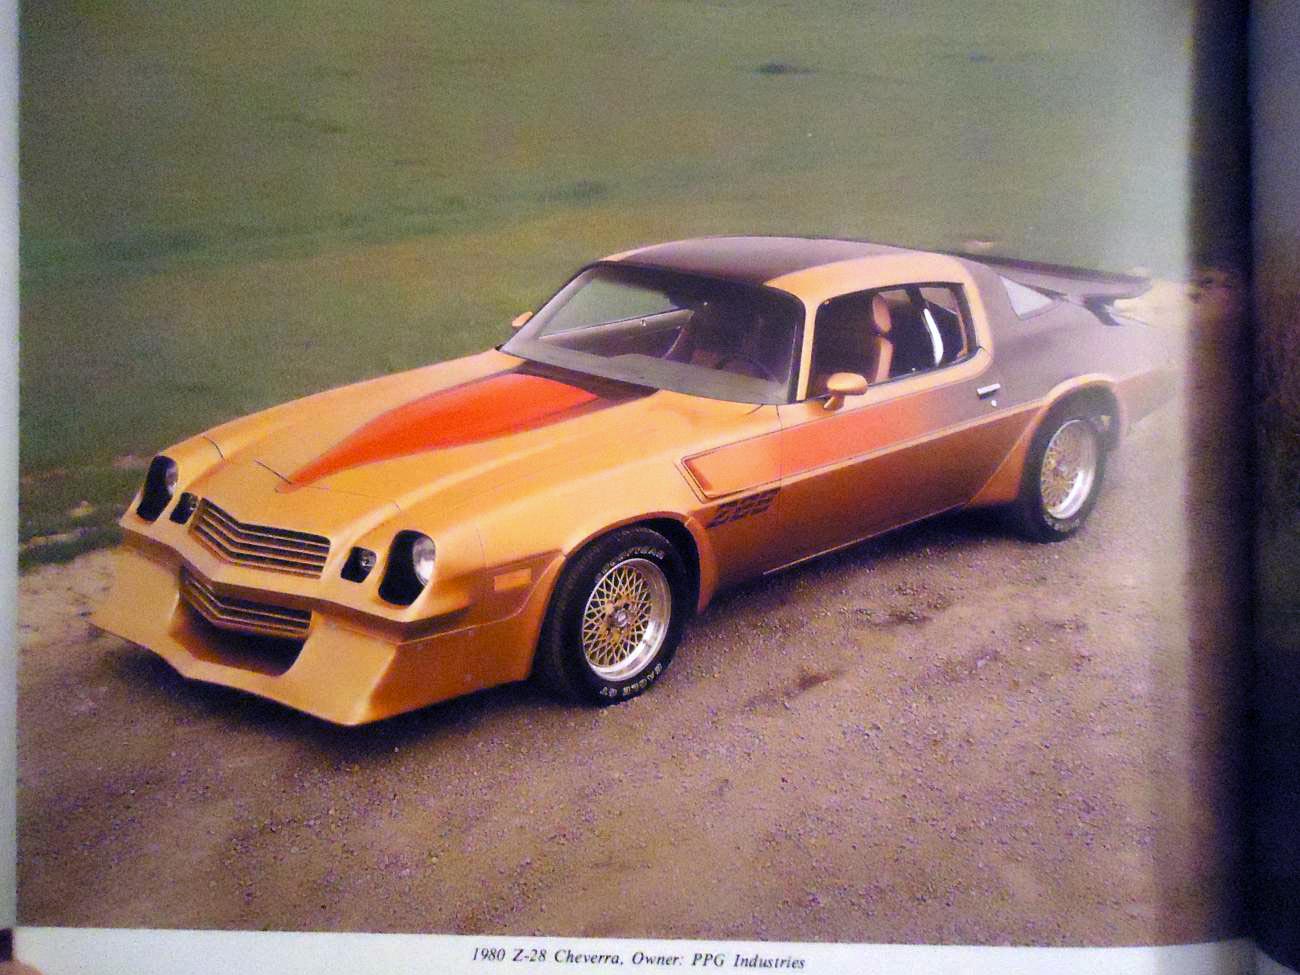 From the book "Camaro! From Challenger to Champion" by Gary L. Witzenburg